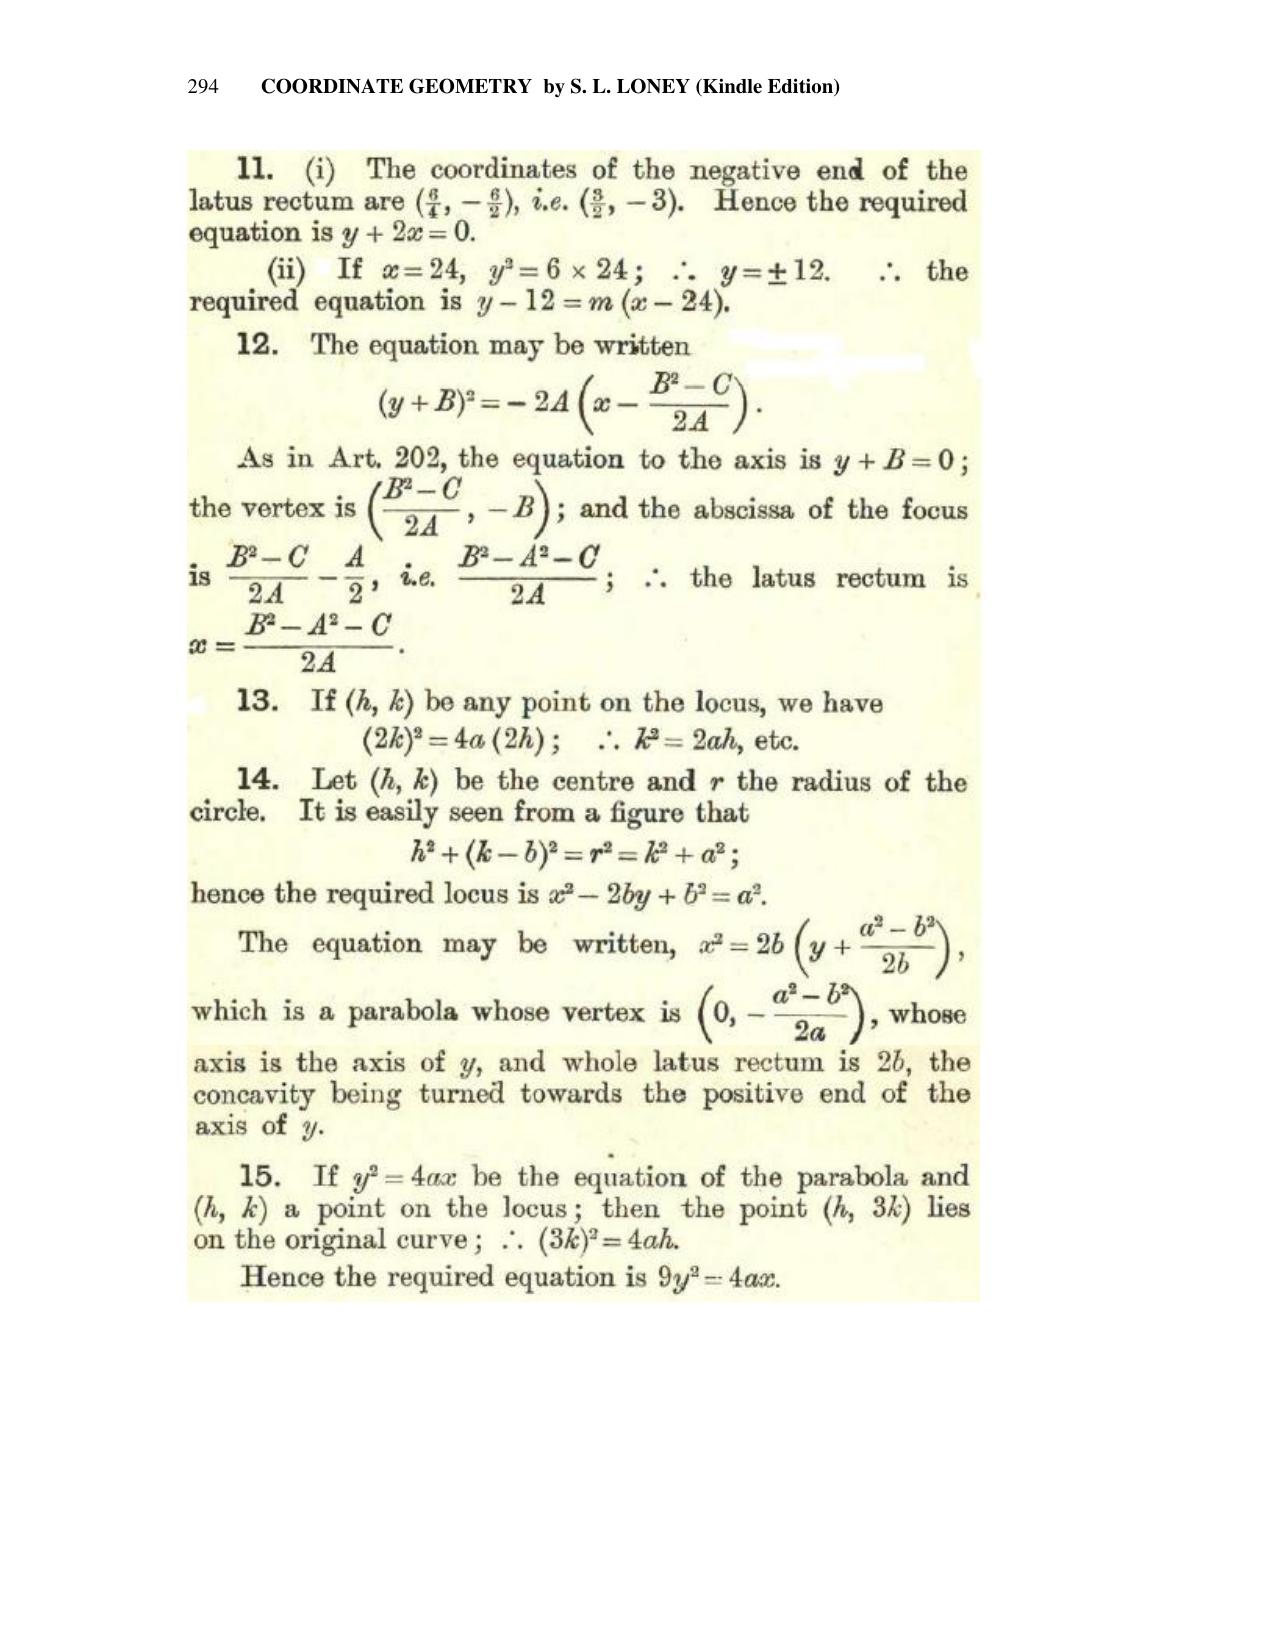 Chapter 10: The Parabola - SL Loney Solutions: The Elements of Coordinate Geometry - Page 8